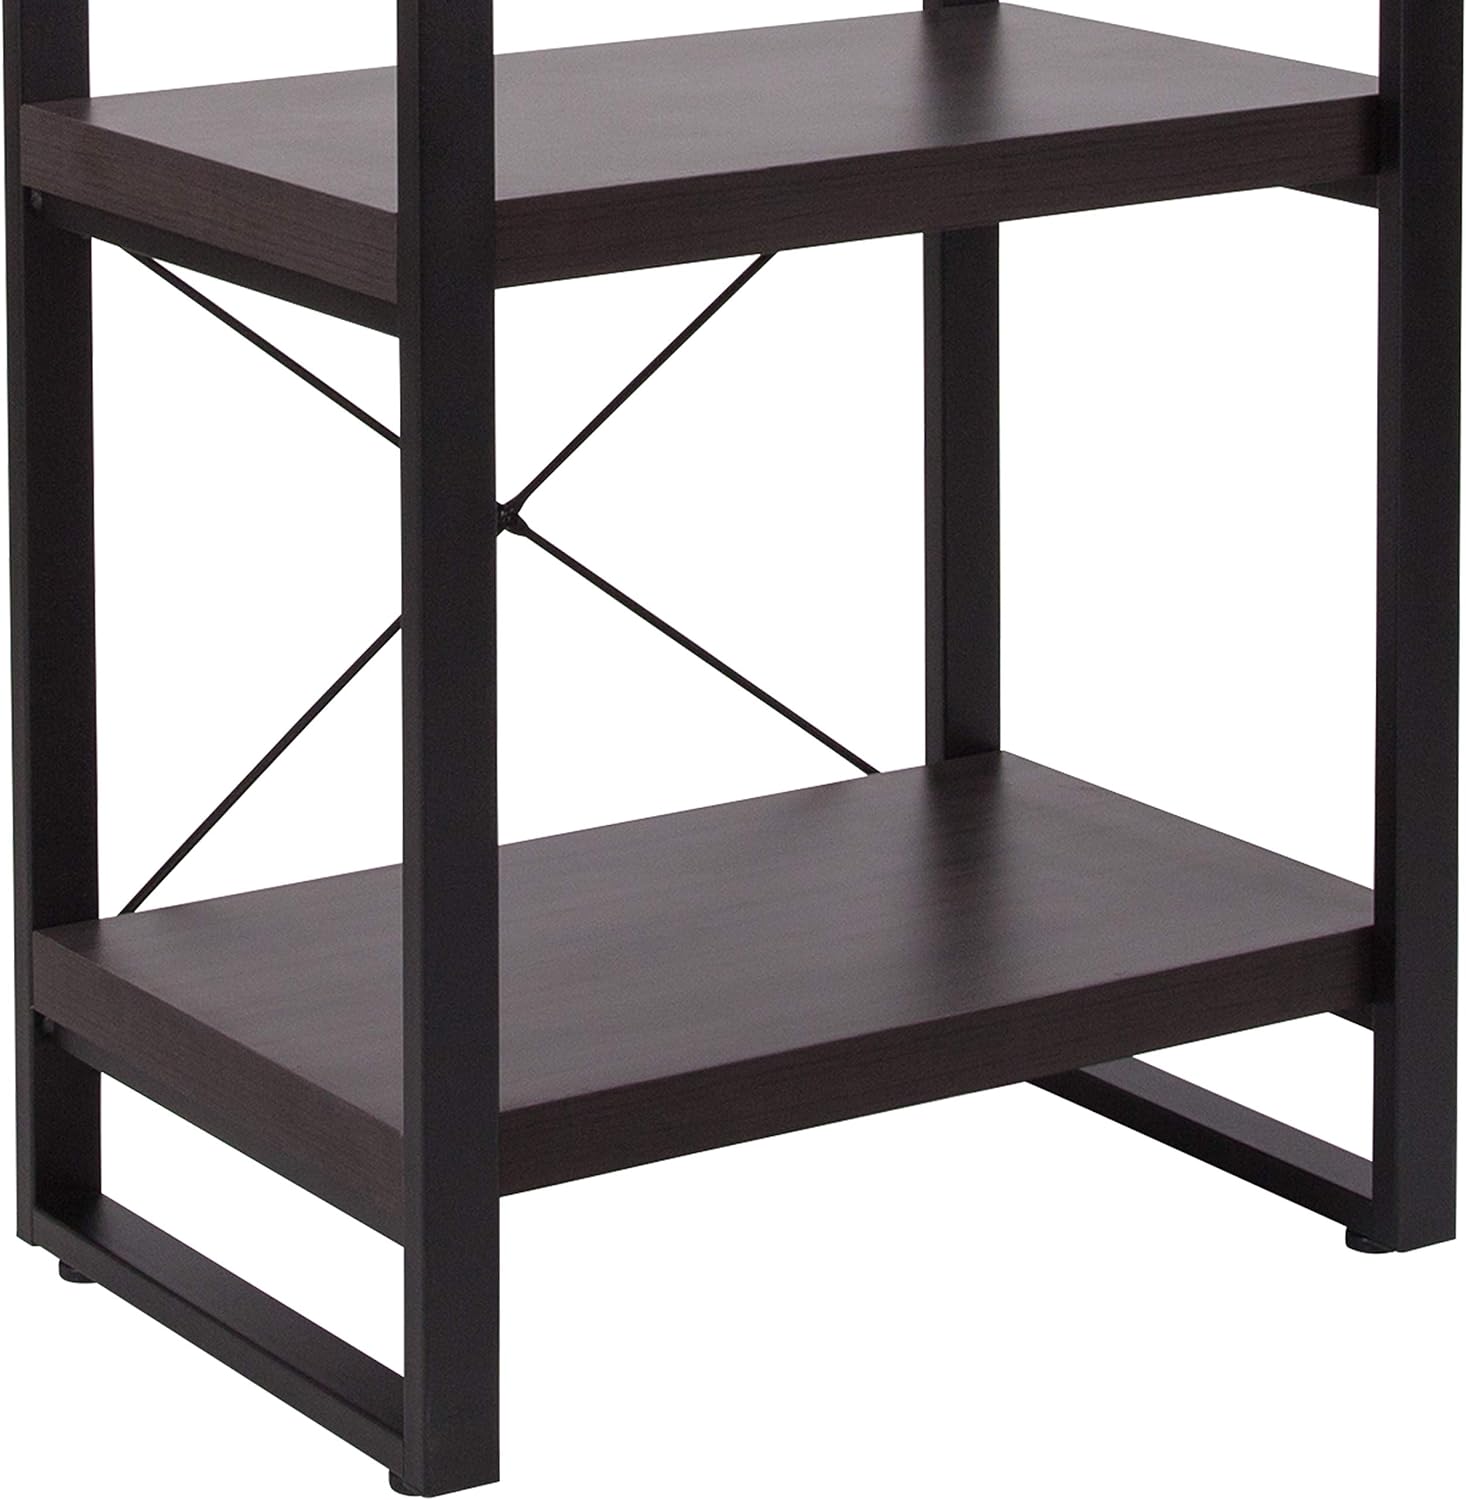 Thompson Collection 4 Shelf 62"H Etagere Bookcase in Charcoal Wood Grain Finish - SchoolOutlet